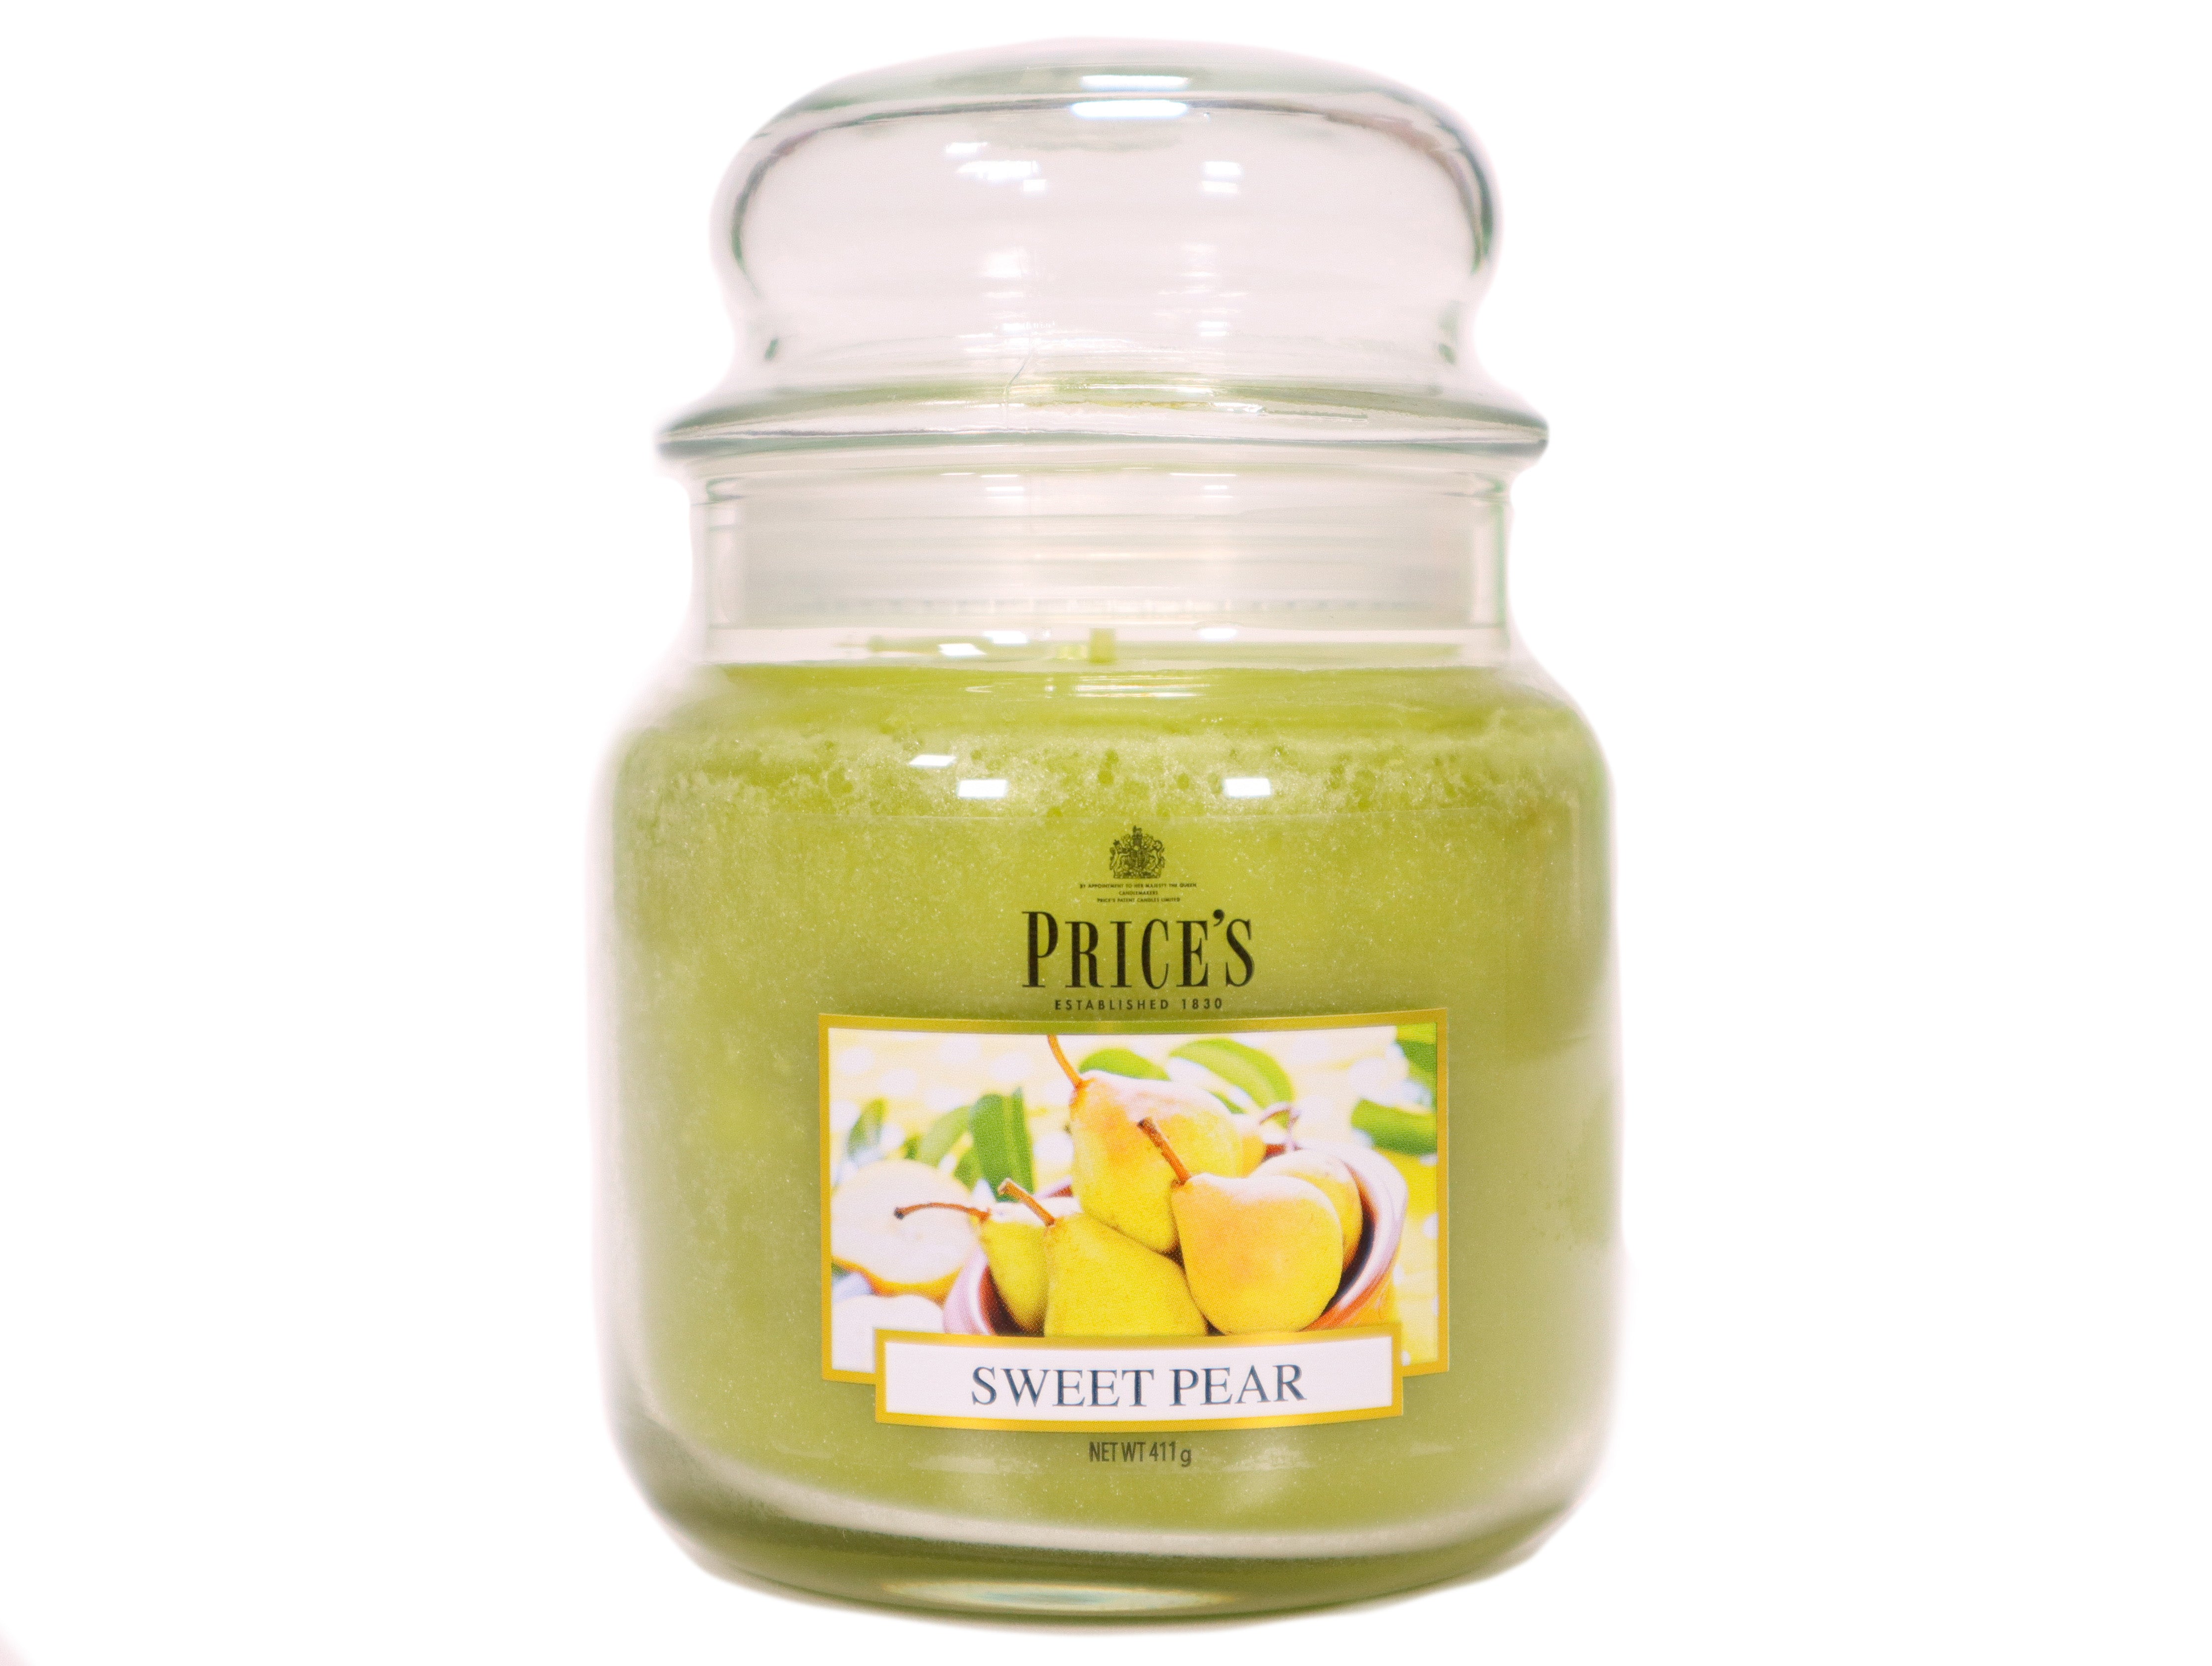 Prices Candles Duftkerze "Sweet Pear" 411g